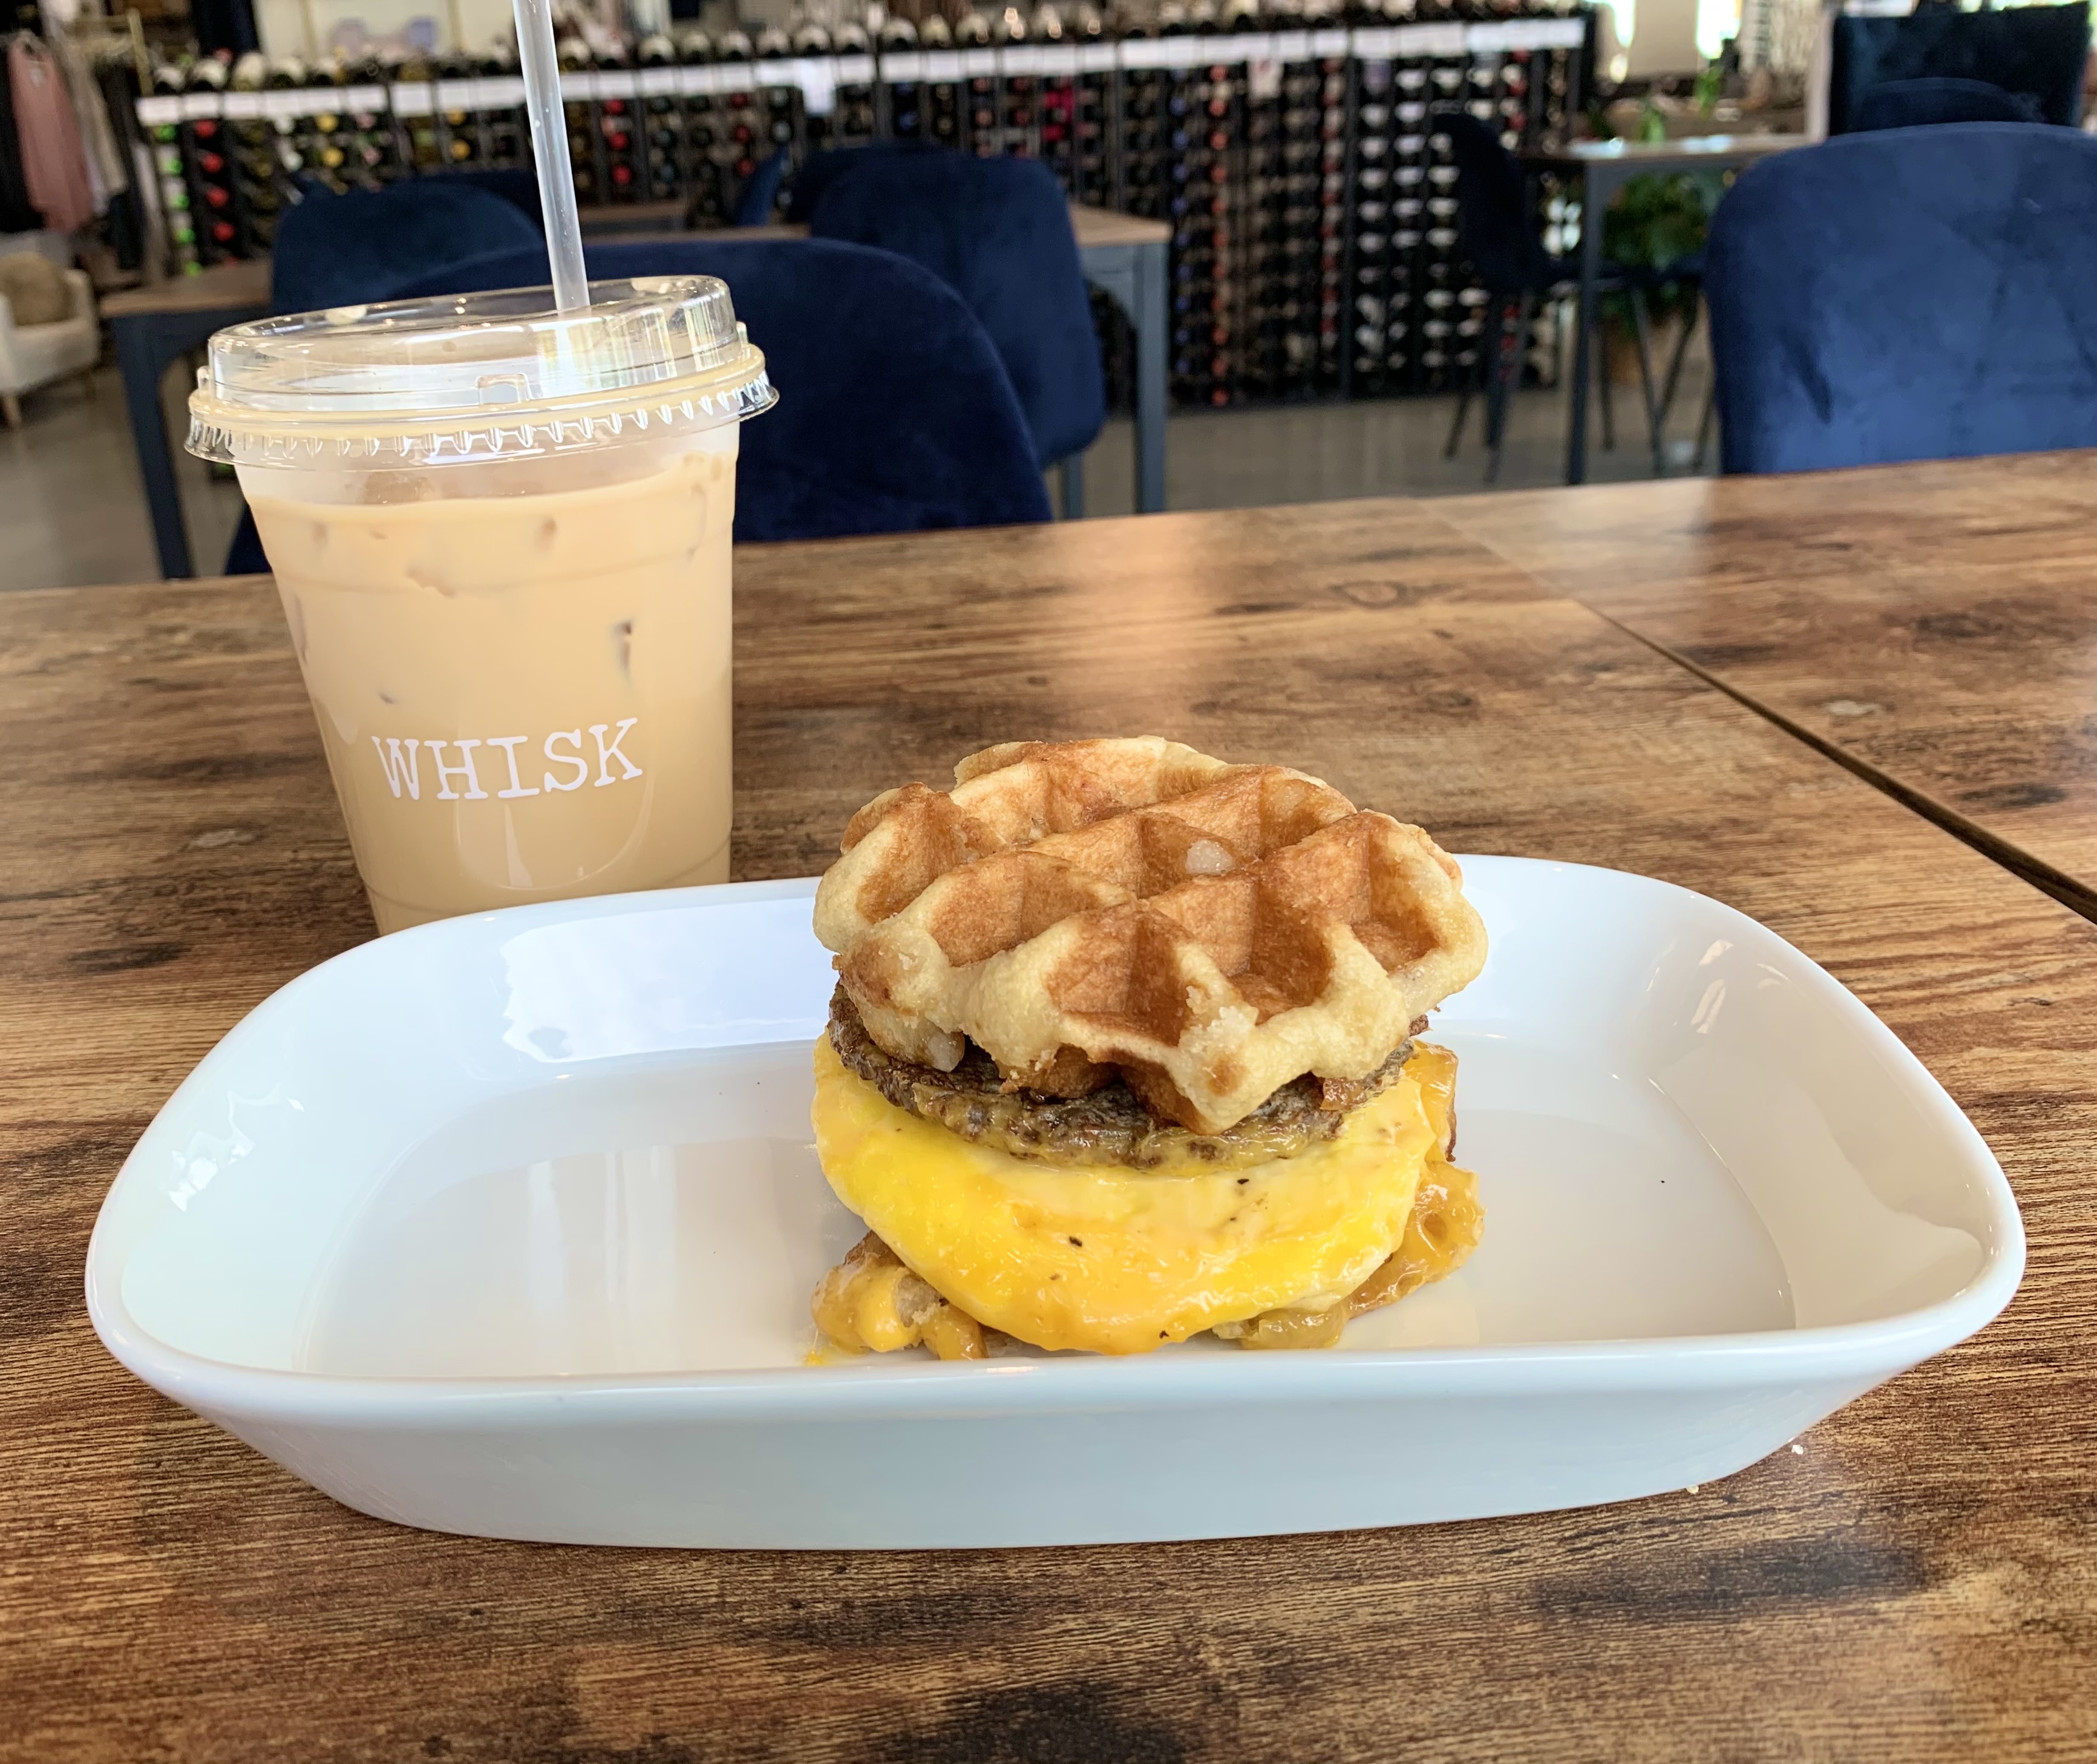 On a whiny white plate, there is a waffle breakfast sandwich. In the background, there is a brown coffee drink in a plastic cup. Photo by Stephanie Wheatley.